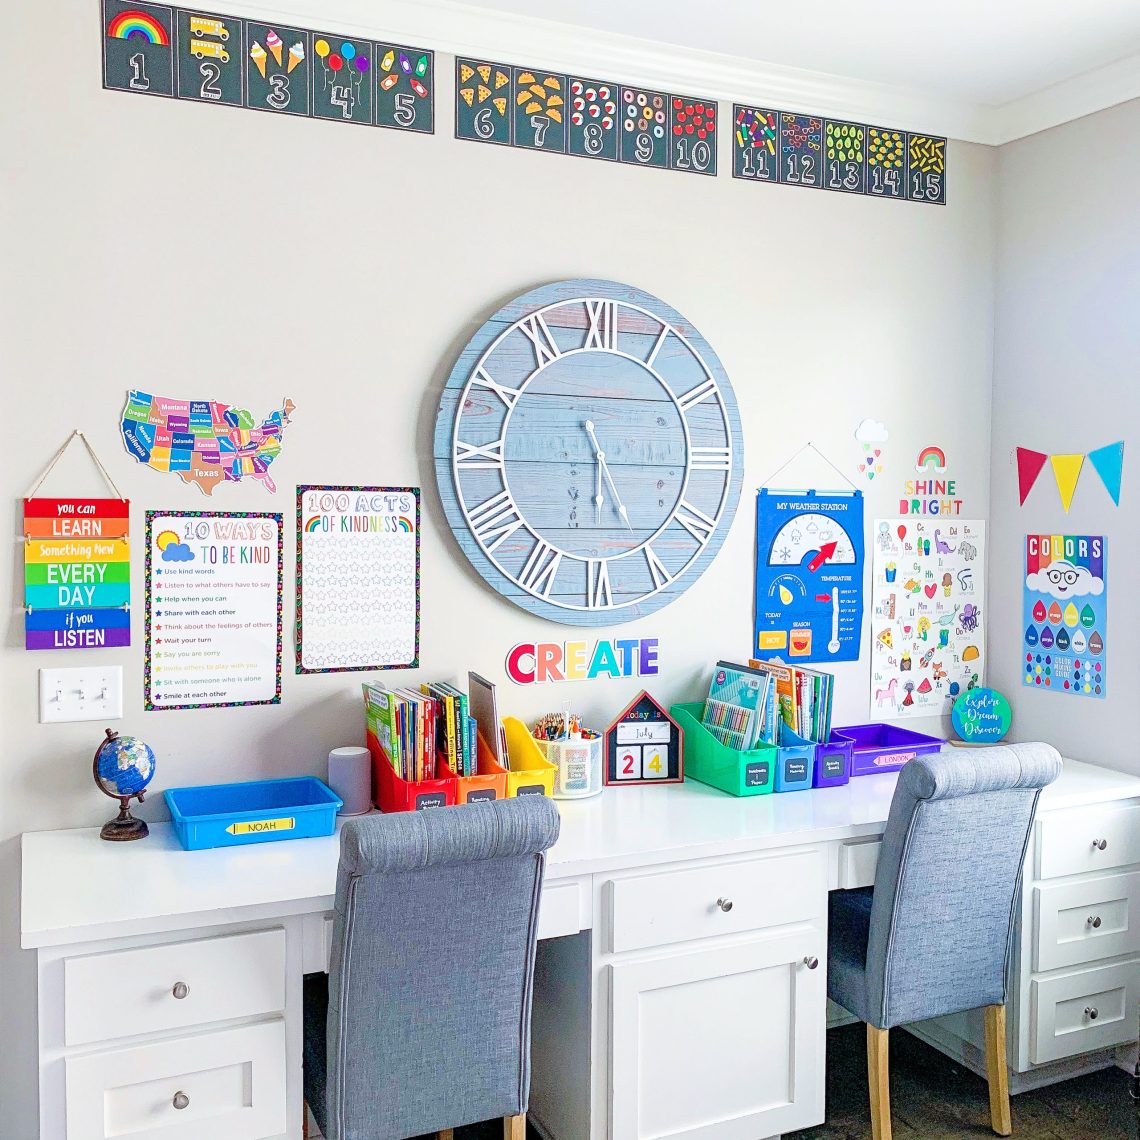 10 Homeschool Room Ideas to Help Your Kids Thrive While Learning at ...